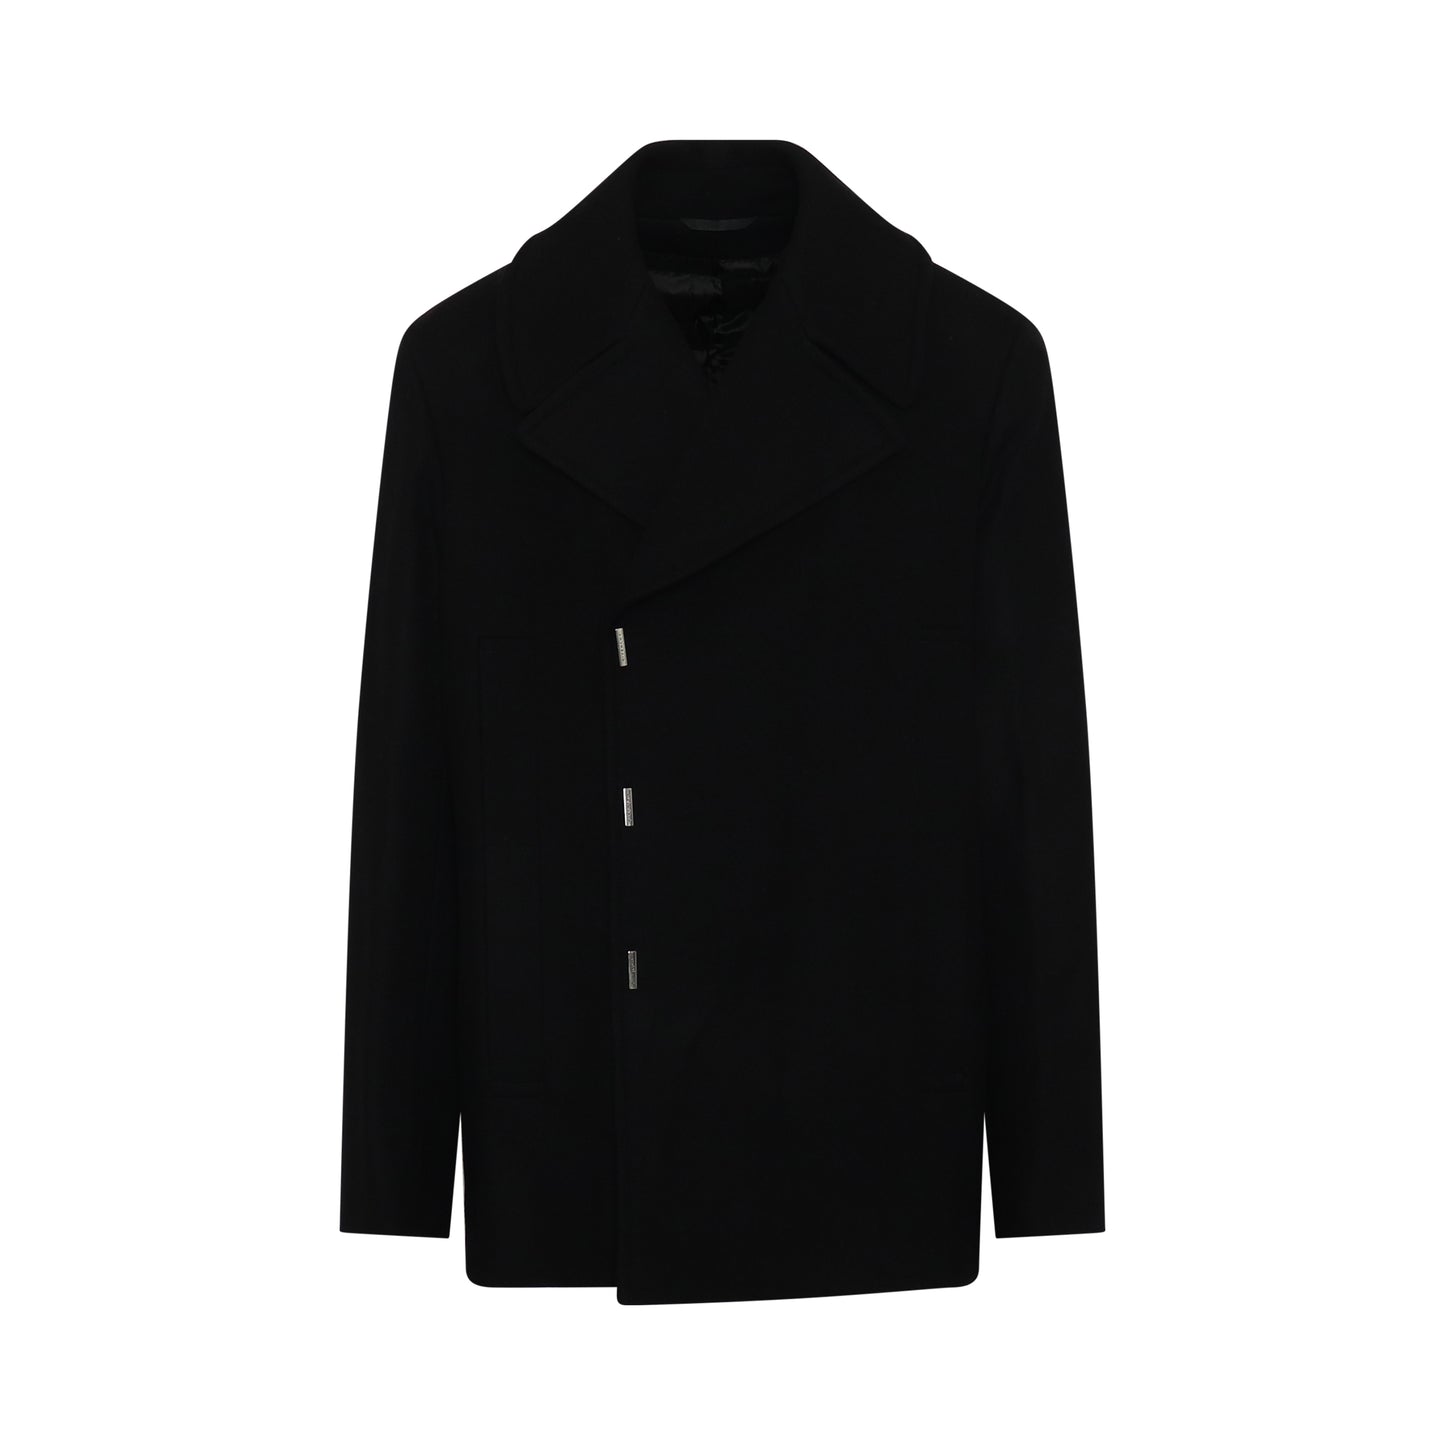 Hook & Bar Quilted Peacoat in Black